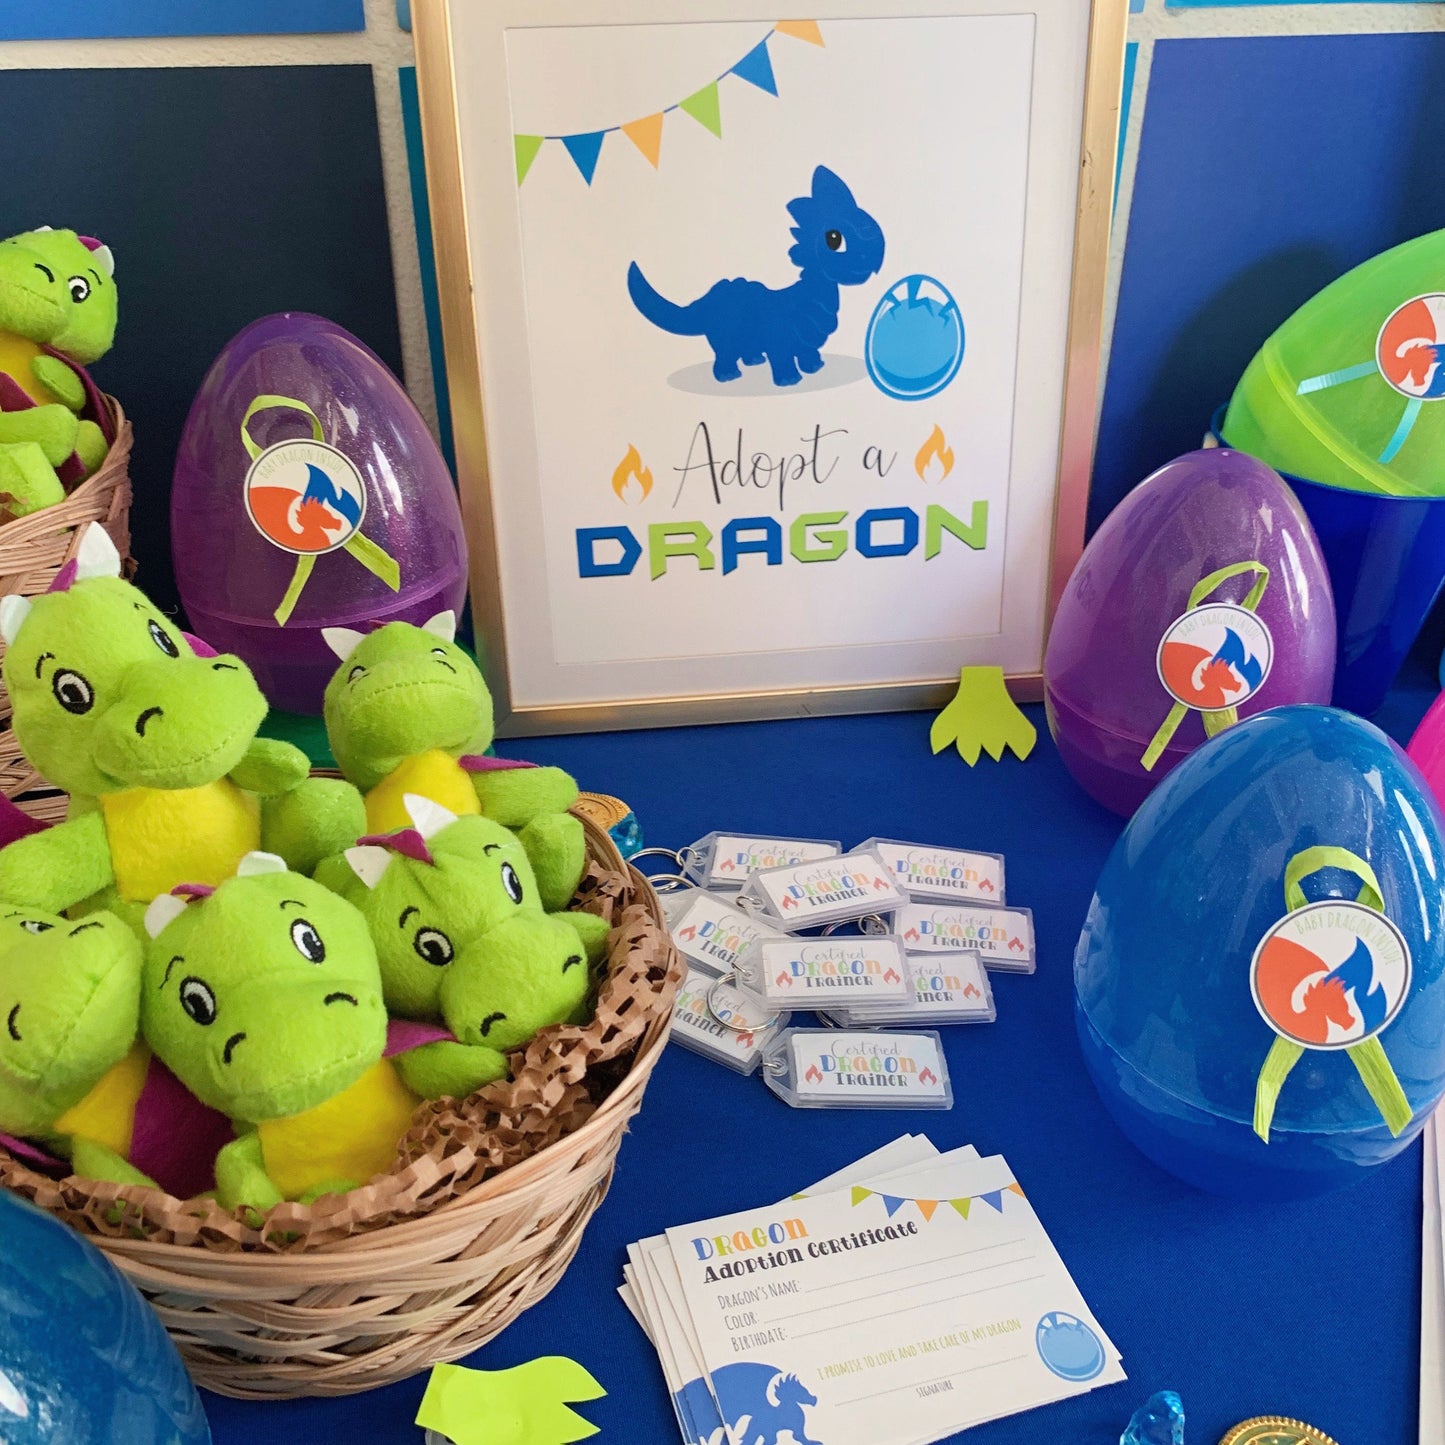 Adopt a Dragon Station with Certificate and Sign